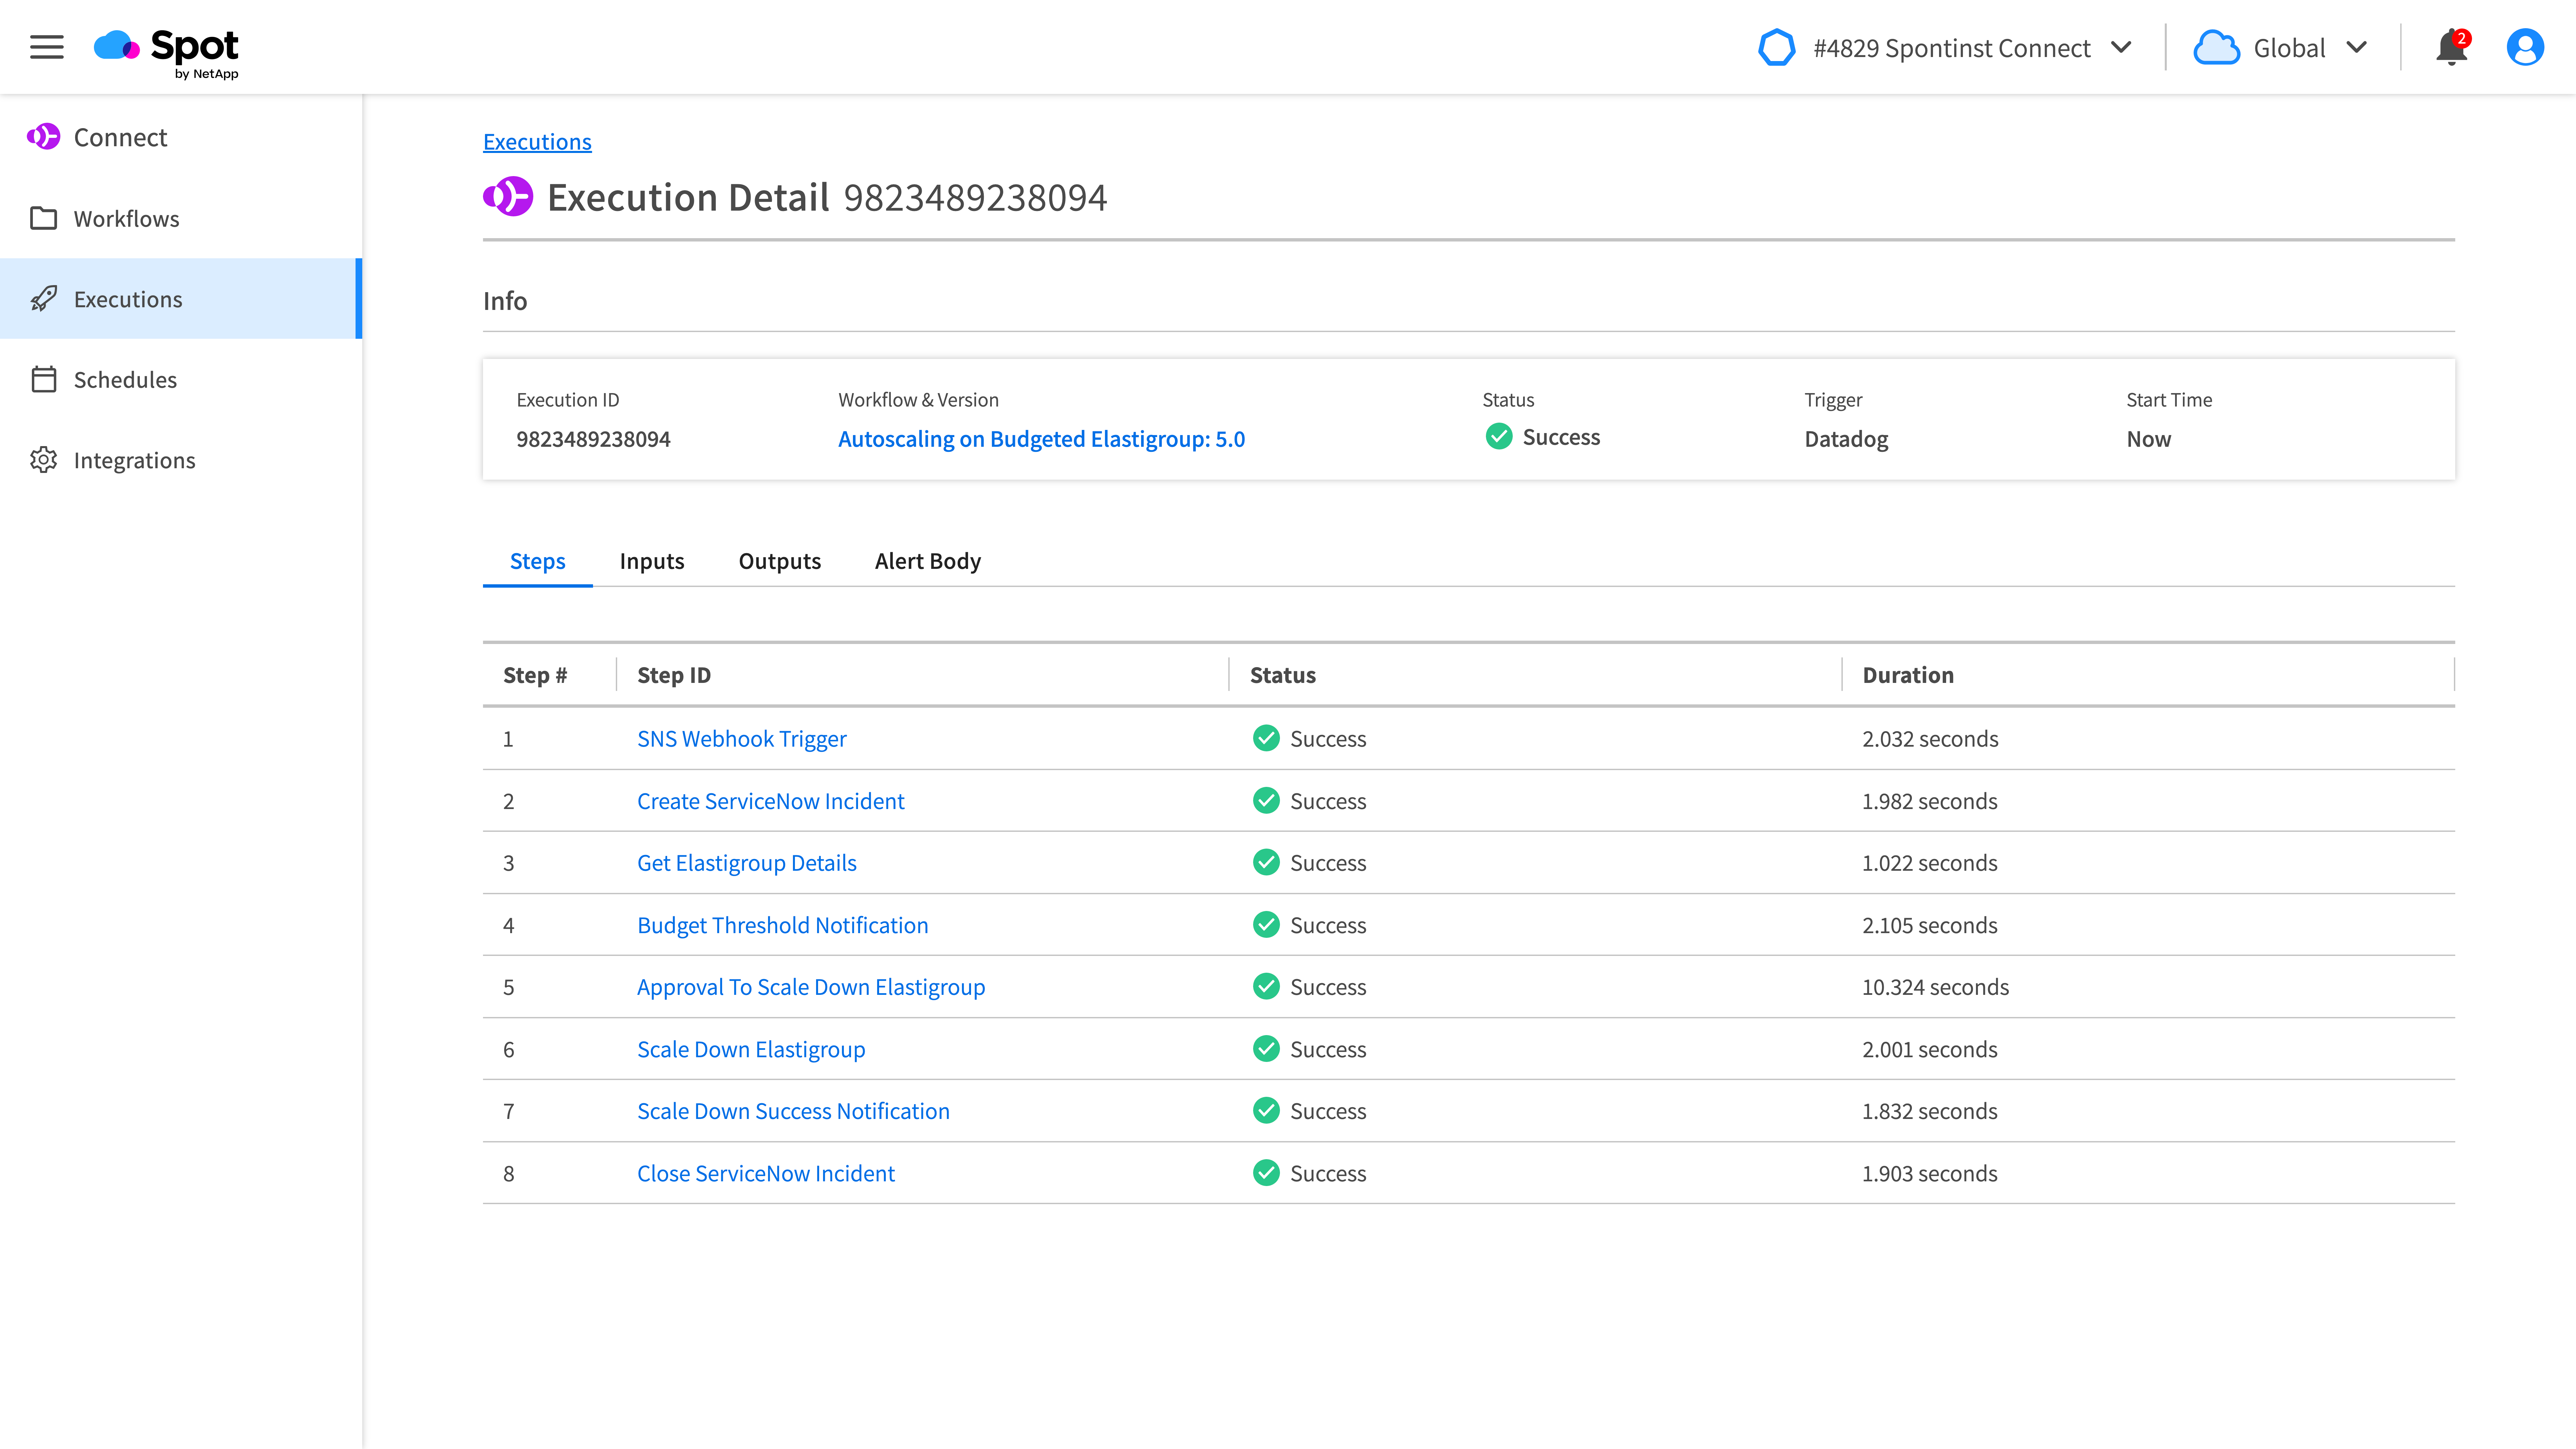 See execution details with Spot Connect